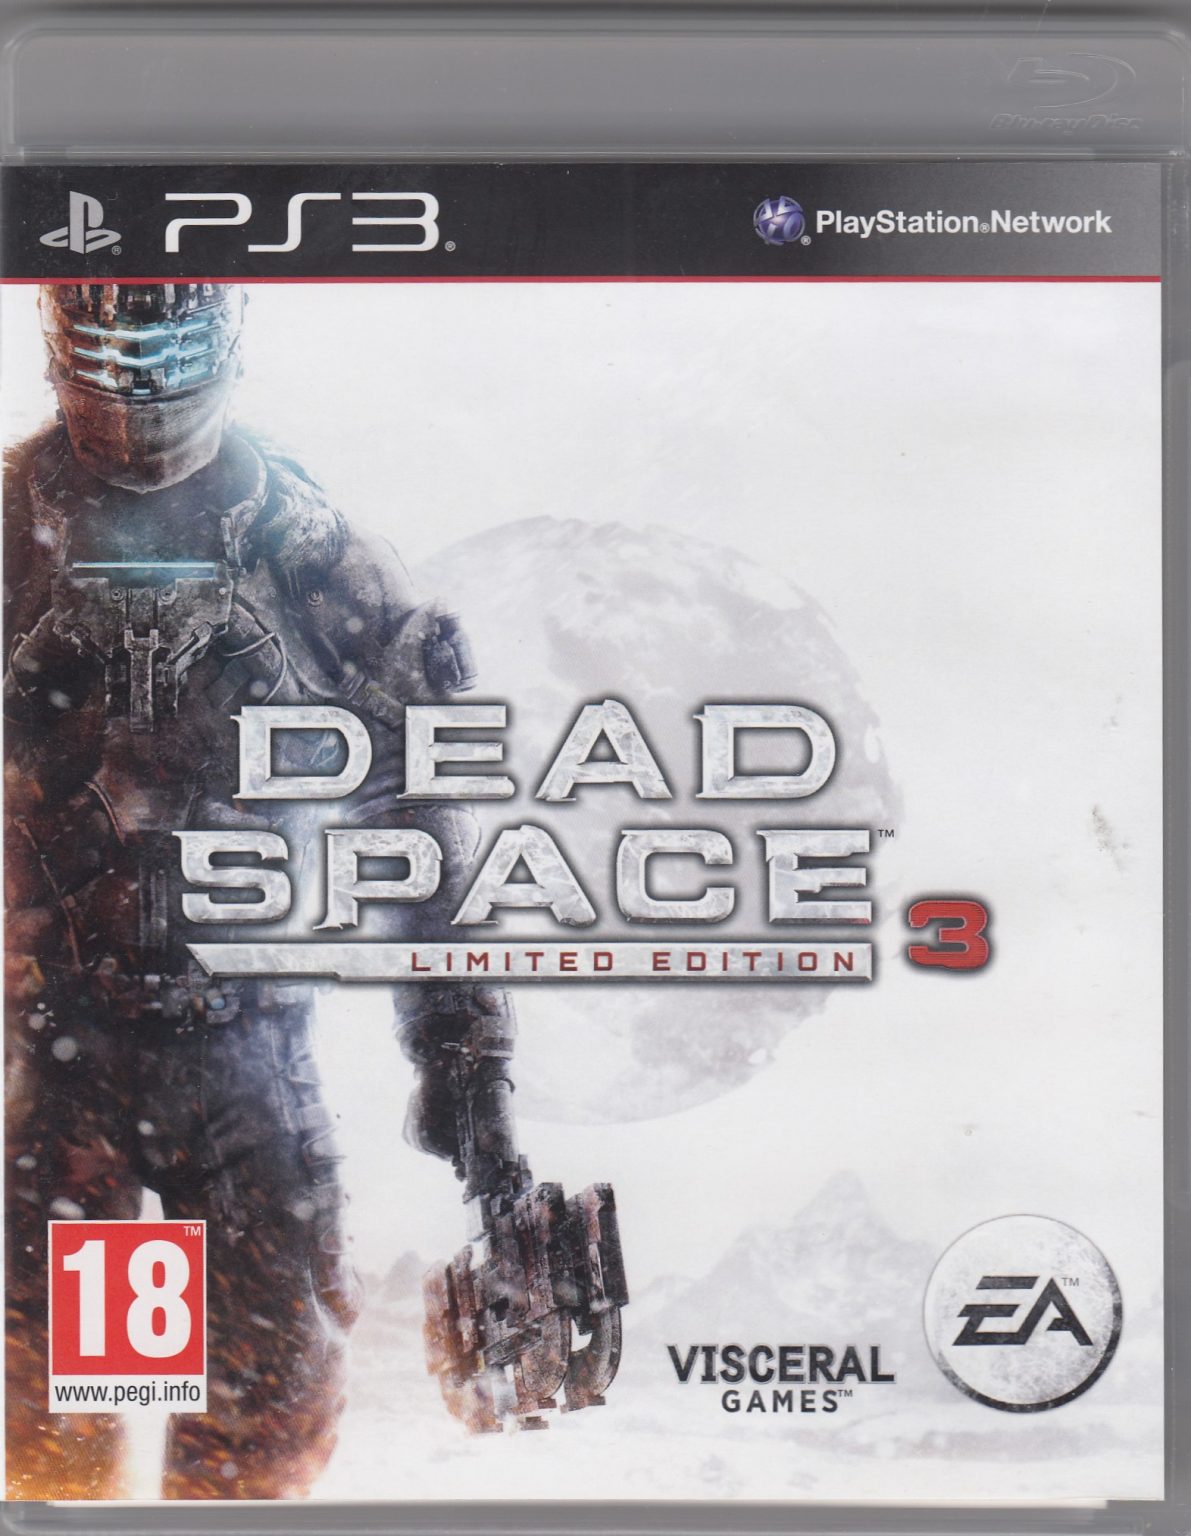 dead space 3 limited edition unopened